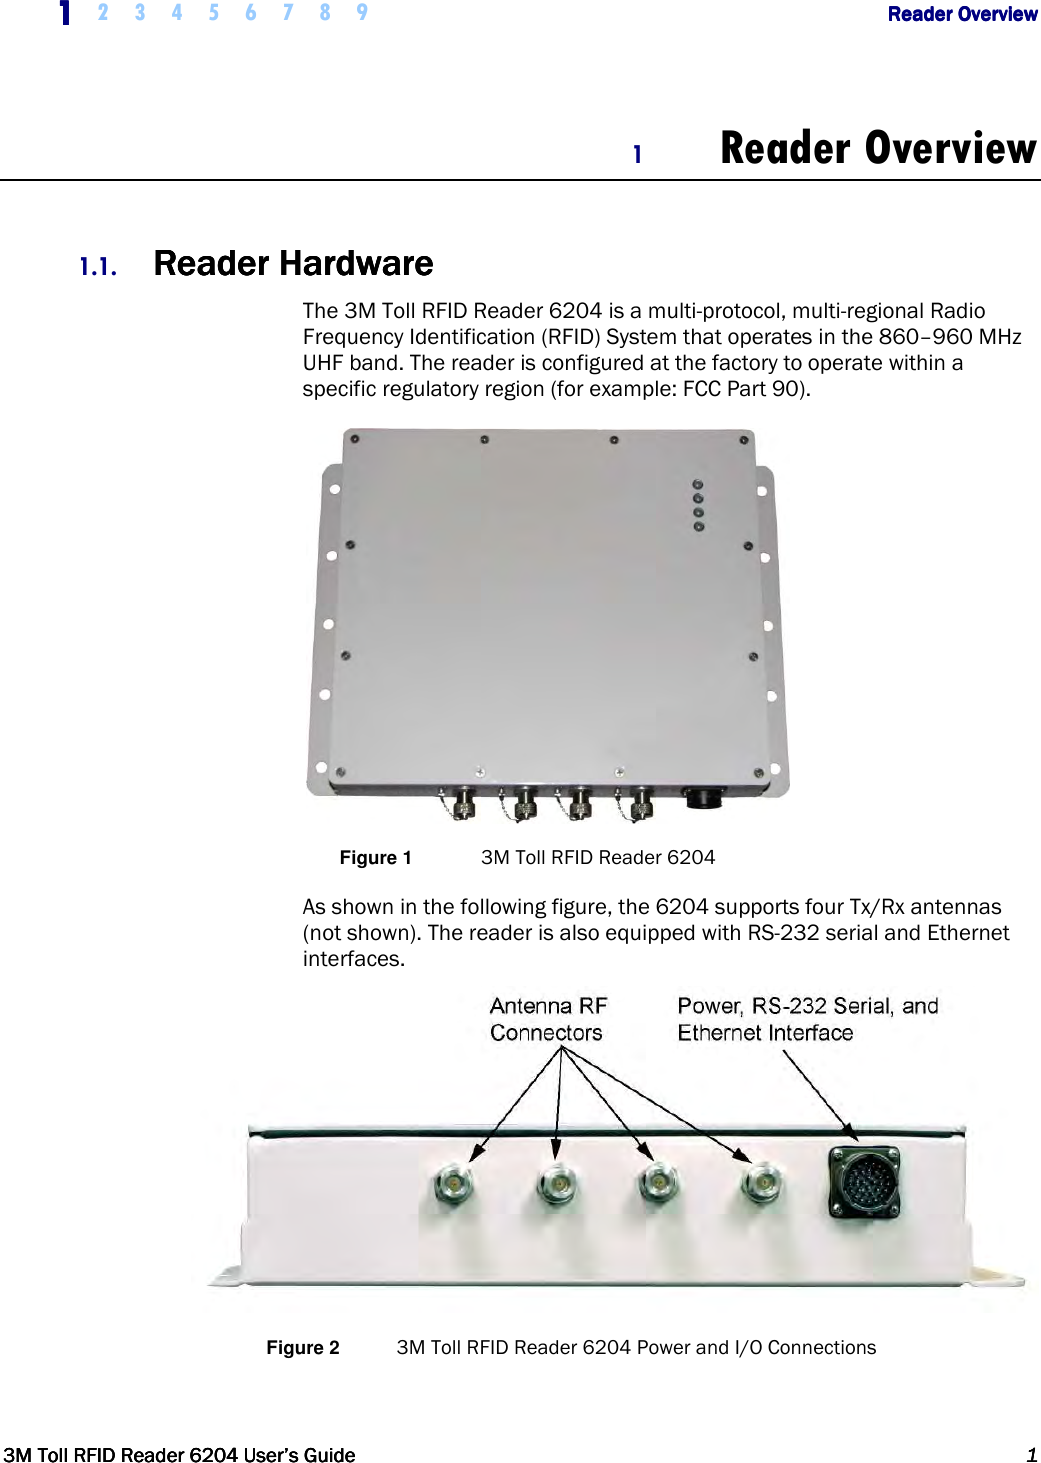     1111    2 3 4 5 6 7 8 9        Reader OverviewReader OverviewReader OverviewReader Overview         3M Toll RFID Reader 62043M Toll RFID Reader 62043M Toll RFID Reader 62043M Toll RFID Reader 6204    User’s GuideUser’s GuideUser’s GuideUser’s Guide     1111     1 Reader Overview  1.1. ReaderReaderReaderReader    HardwareHardwareHardwareHardware    The 3M Toll RFID Reader 6204 is a multi-protocol, multi-regional Radio Frequency Identification (RFID) System that operates in the 860–960 MHz UHF band. The reader is configured at the factory to operate within a specific regulatory region (for example: FCC Part 90).  Figure 1  3M Toll RFID Reader 6204 As shown in the following figure, the 6204 supports four Tx/Rx antennas (not shown). The reader is also equipped with RS-232 serial and Ethernet interfaces.  Figure 2  3M Toll RFID Reader 6204 Power and I/O Connections 